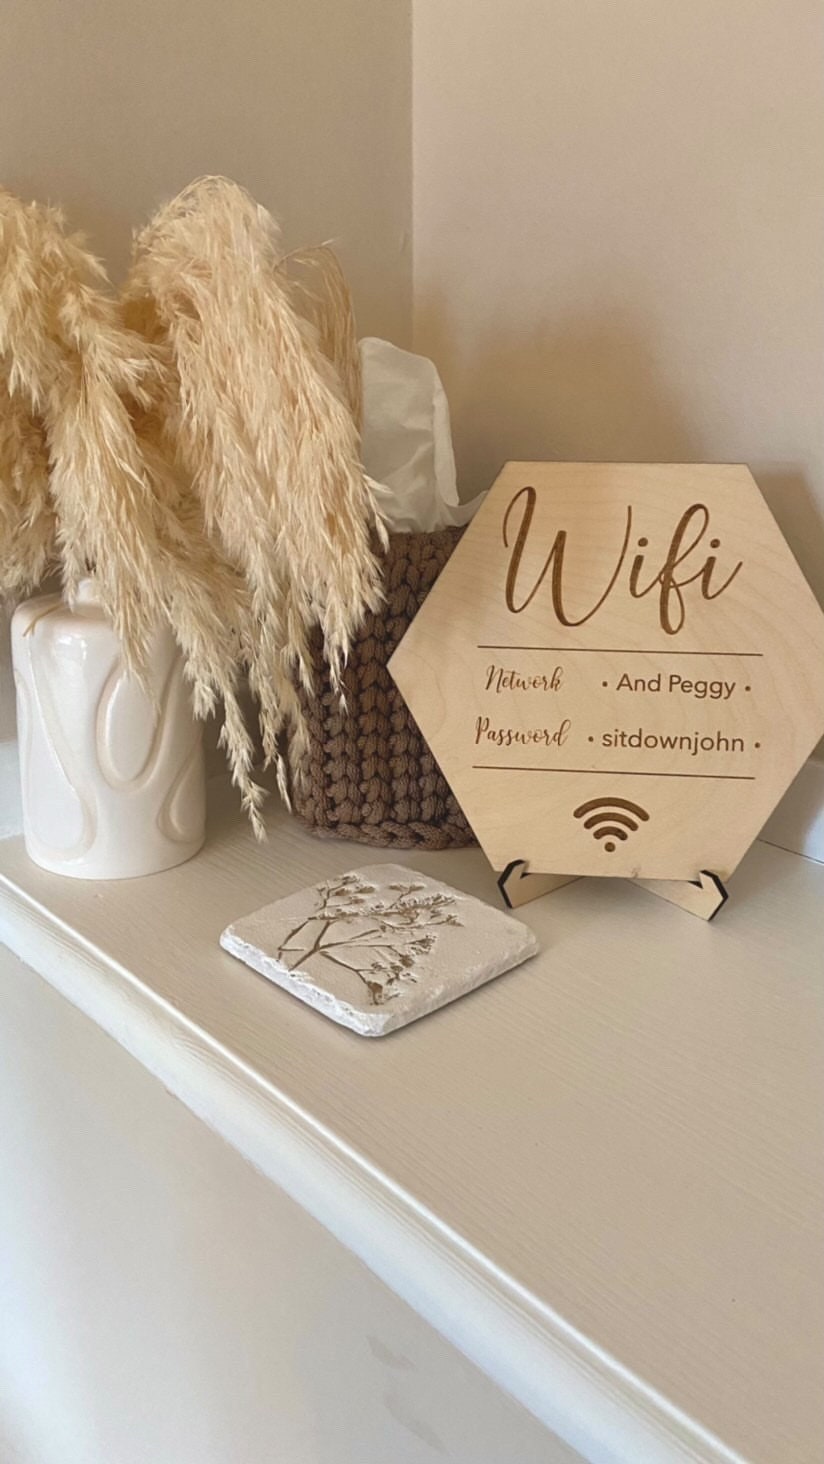 Home Wi-Fi Password Sign, Personalised WiFi Sign, Internet Password Plaque, Wooden Internet Sign, New Home Gift, Engraved WiFi Disc